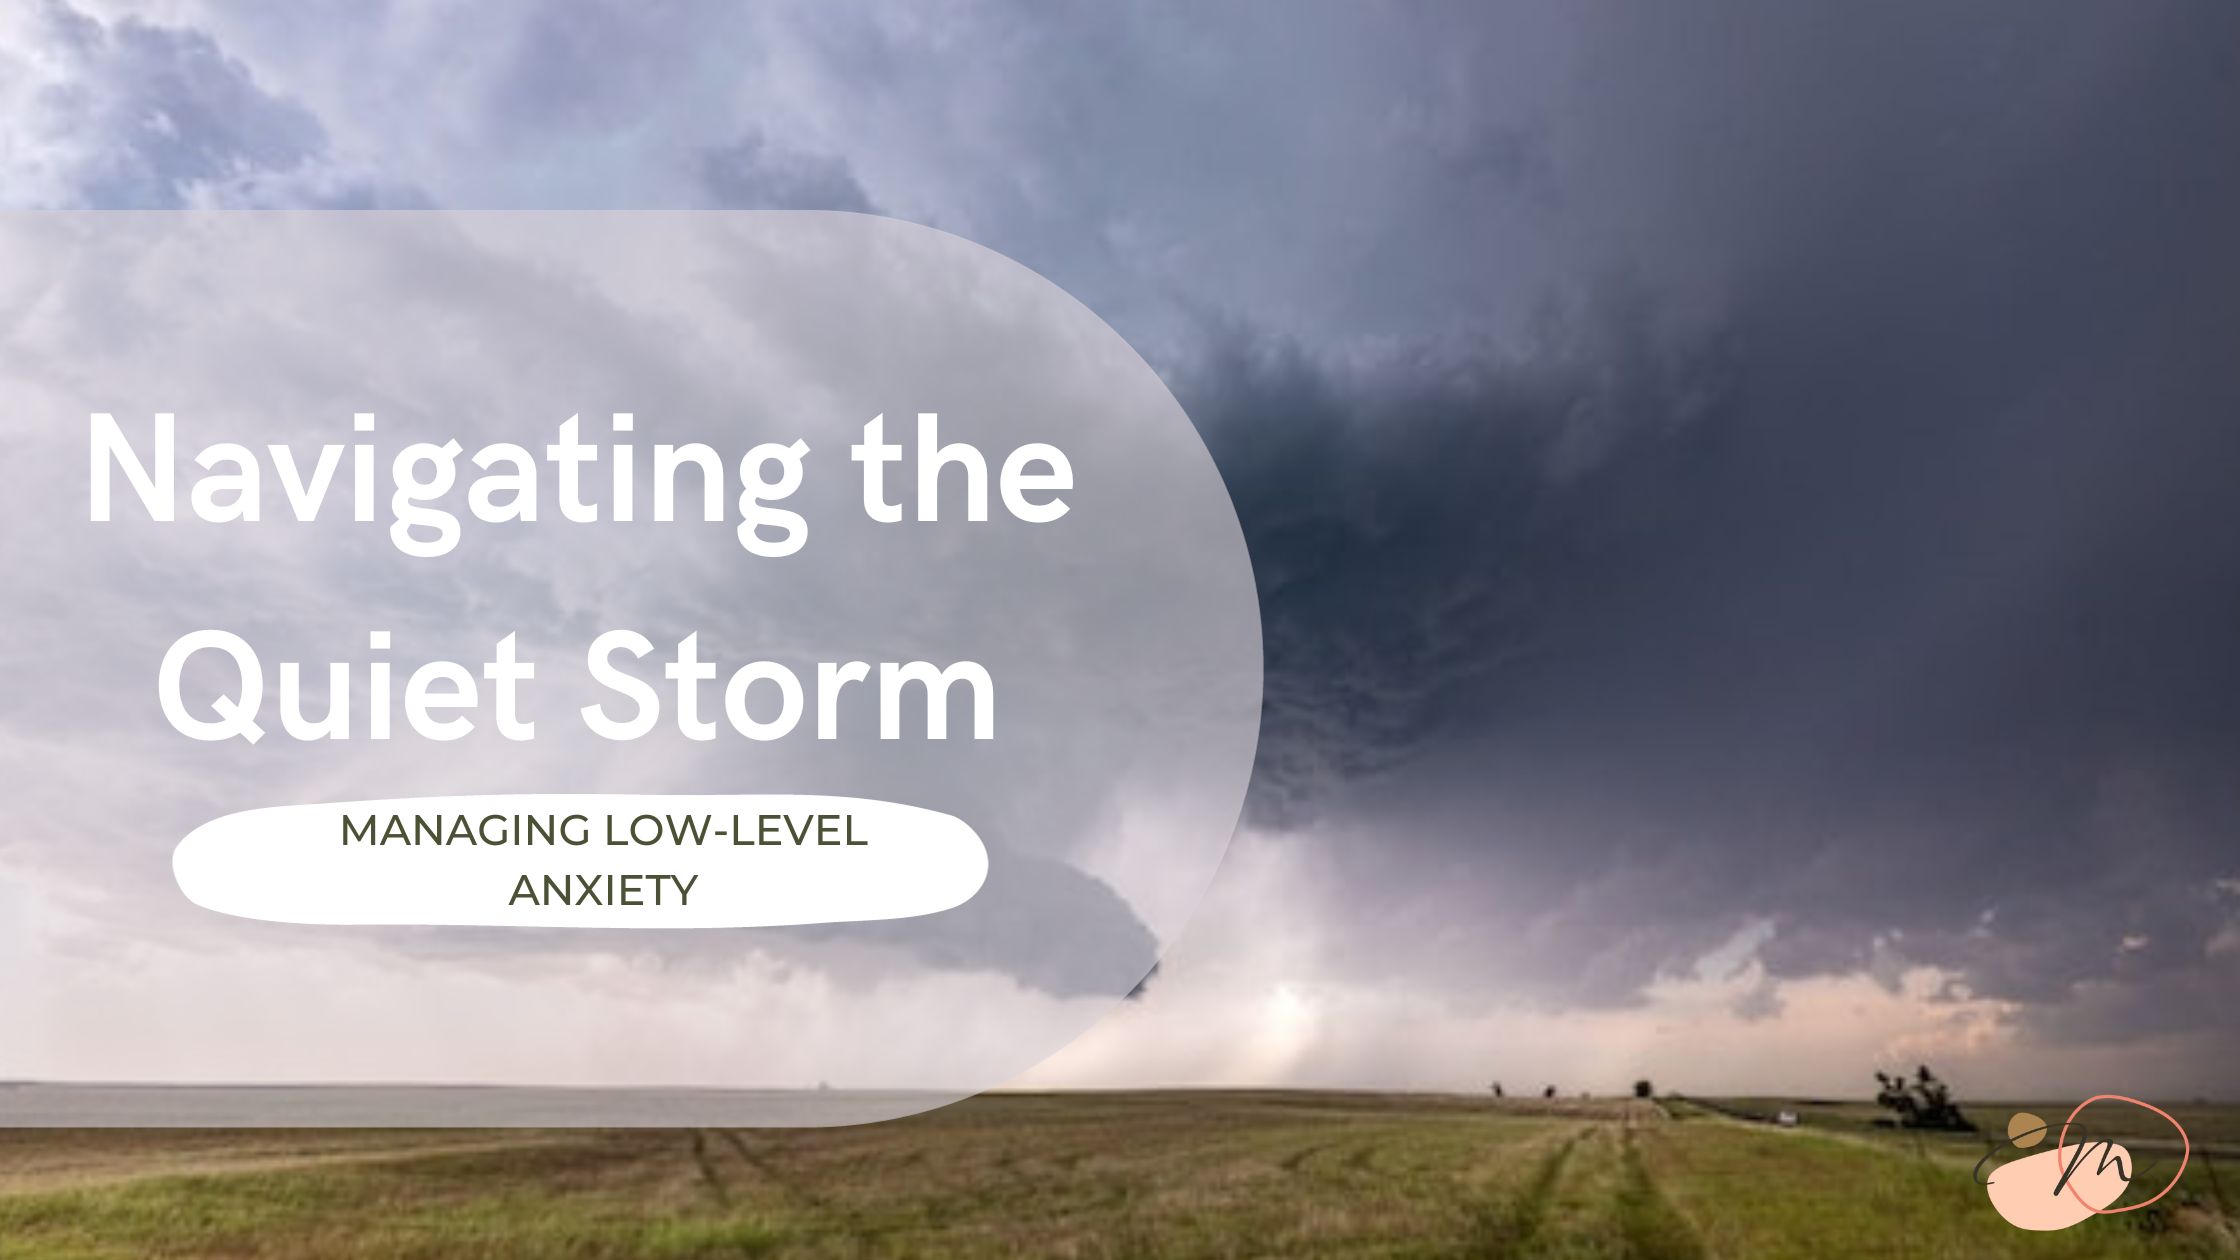 Navigating the Quiet Storm: Managing Low-Level Anxiety blog cover.